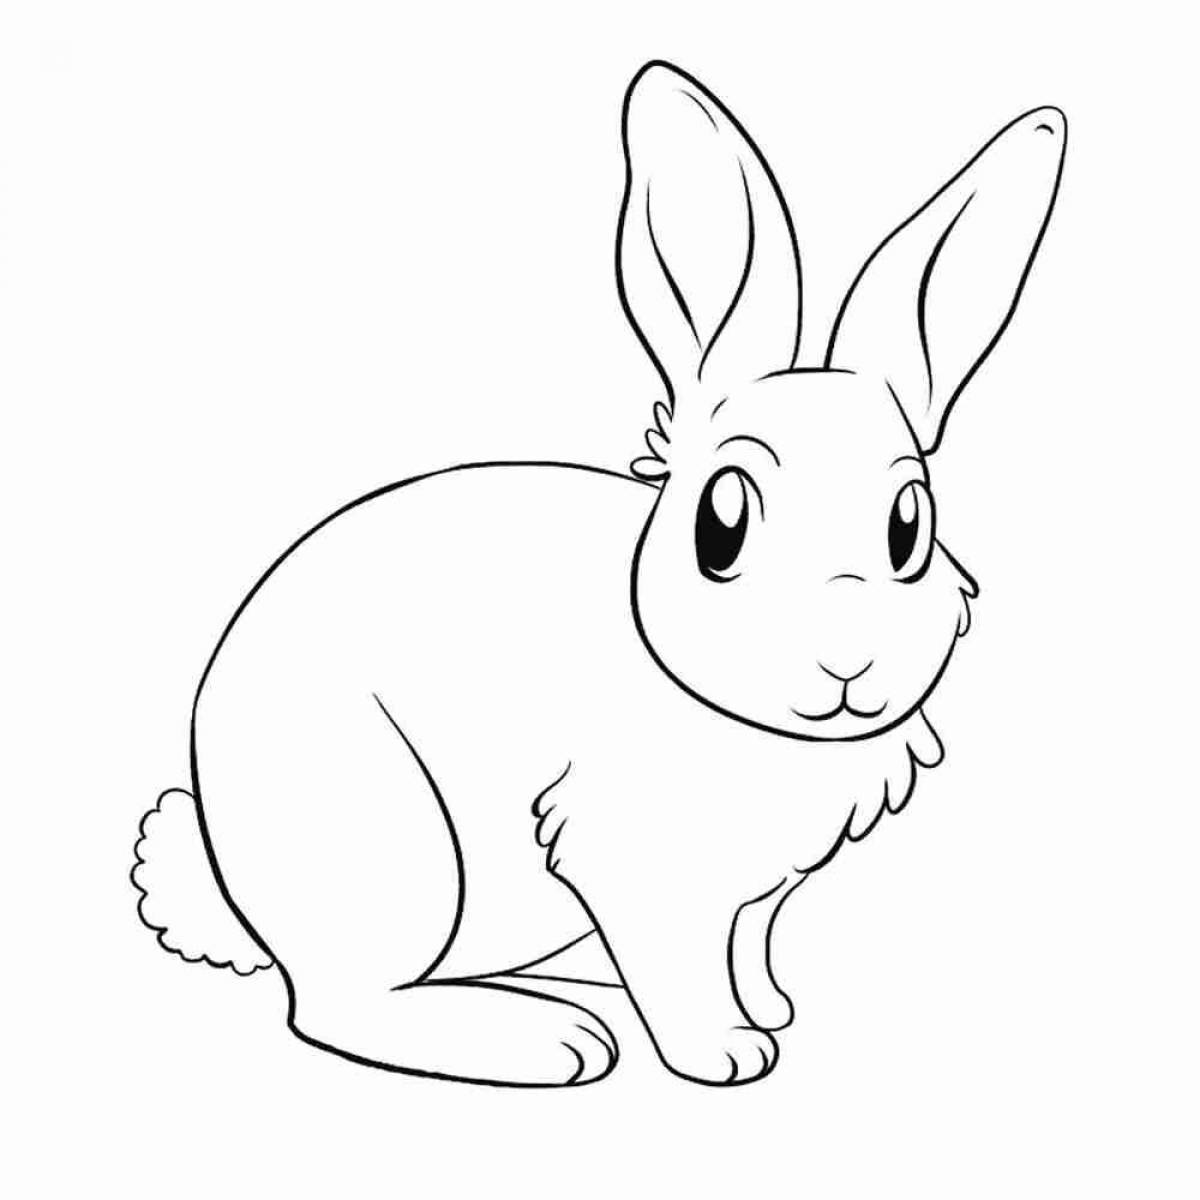 Playtime coloring hare picture for kids